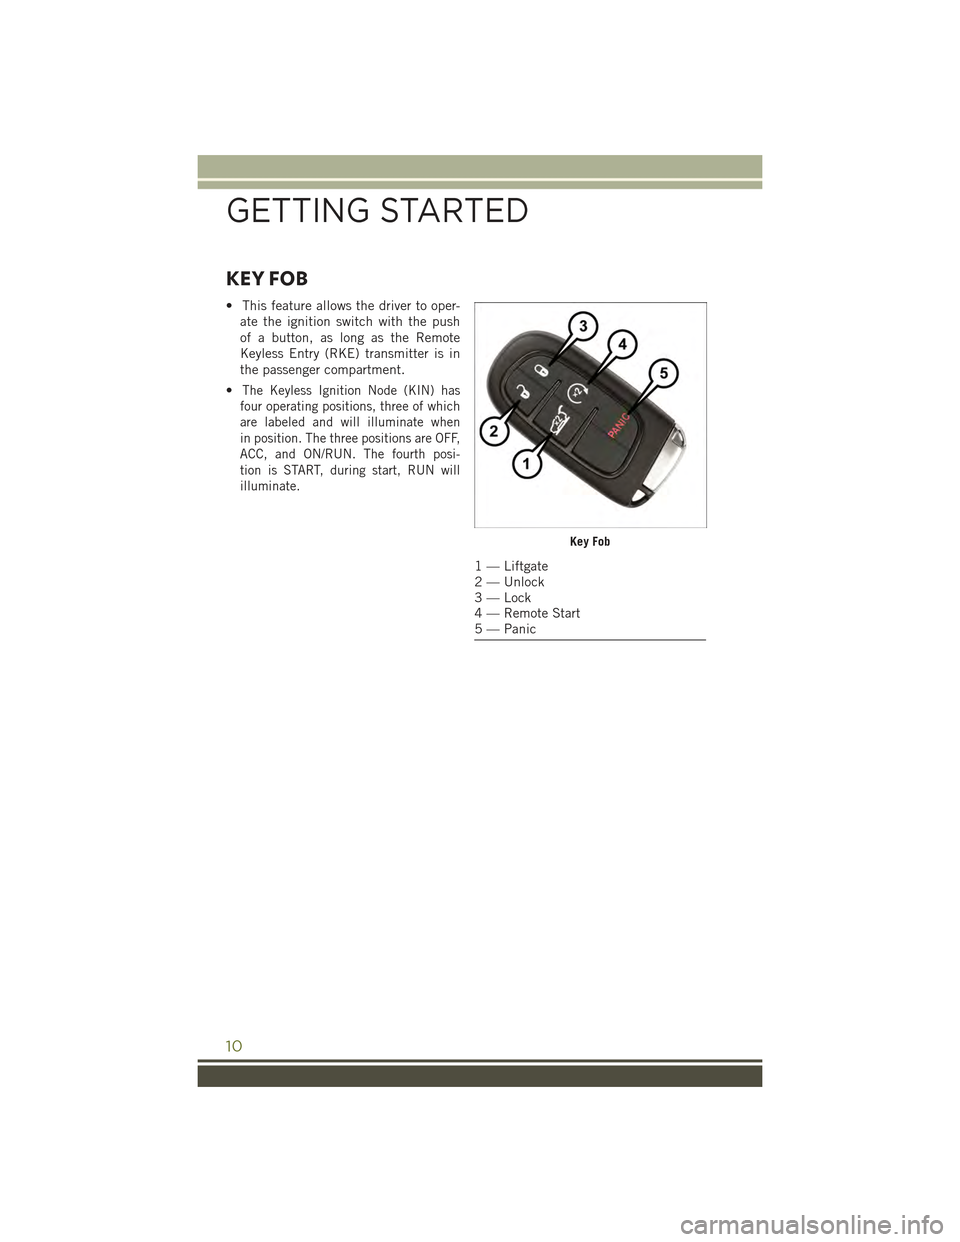 JEEP CHEROKEE 2015 KL / 5.G User Guide KEY FOB
• This feature allows the driver to oper-
ate the ignition switch with the push
of a button, as long as the Remote
Keyless Entry (RKE) transmitter is in
the passenger compartment.
•The Key